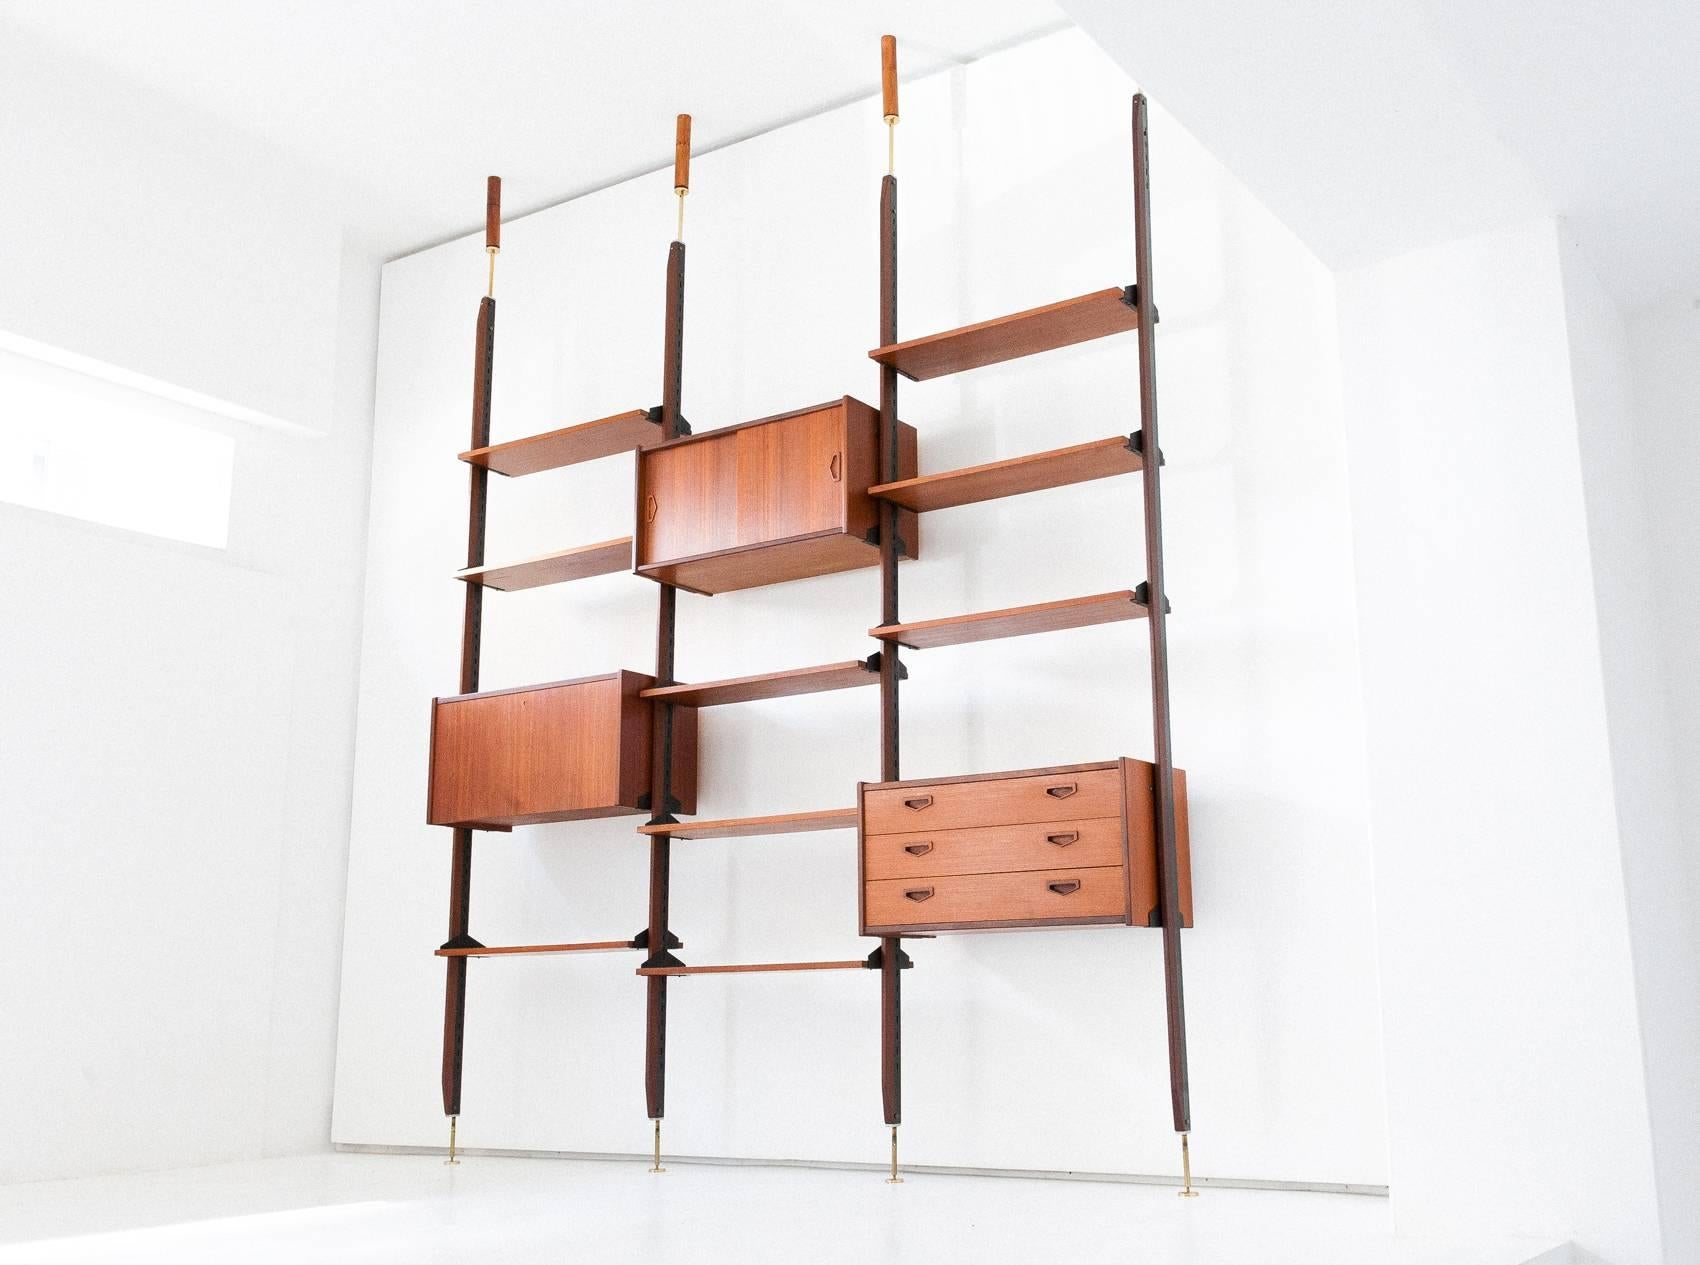 Bookshelf/wall unit
Italian design
1950s
Teak, iron, brass

Completely restored

The height is adjustable, just specify your ceiling height for a confirmation

The wooden support to the ceiling is just for the pictures

Worldwide shipment